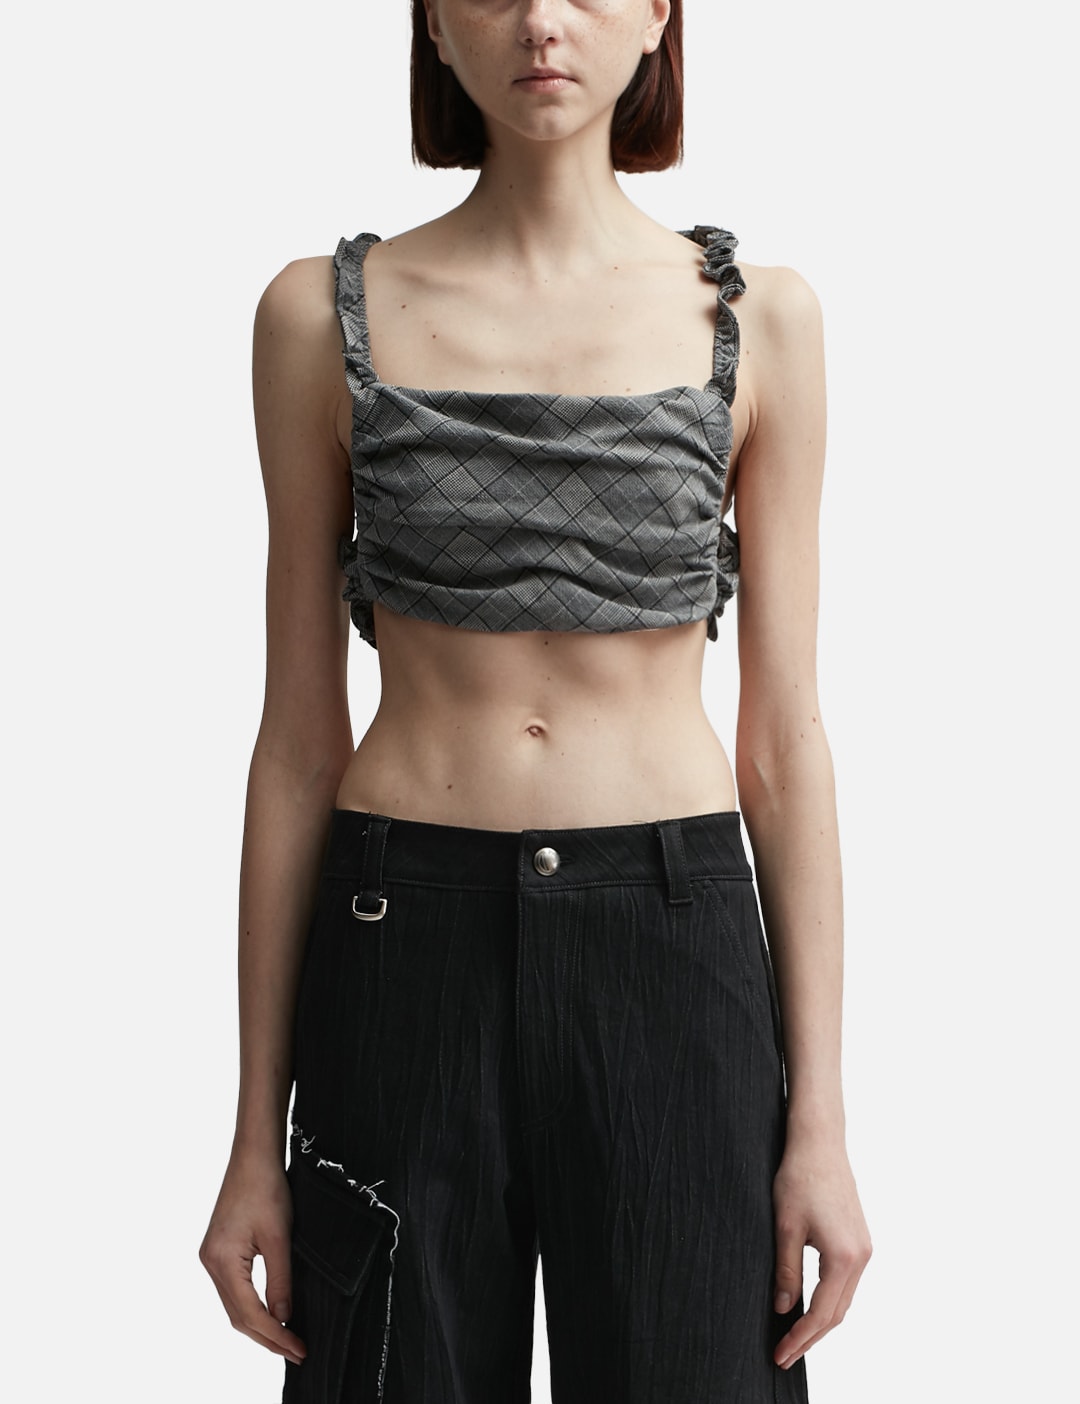 Hyein Seo - THERMAL TUBE TOP  HBX - Globally Curated Fashion and Lifestyle  by Hypebeast